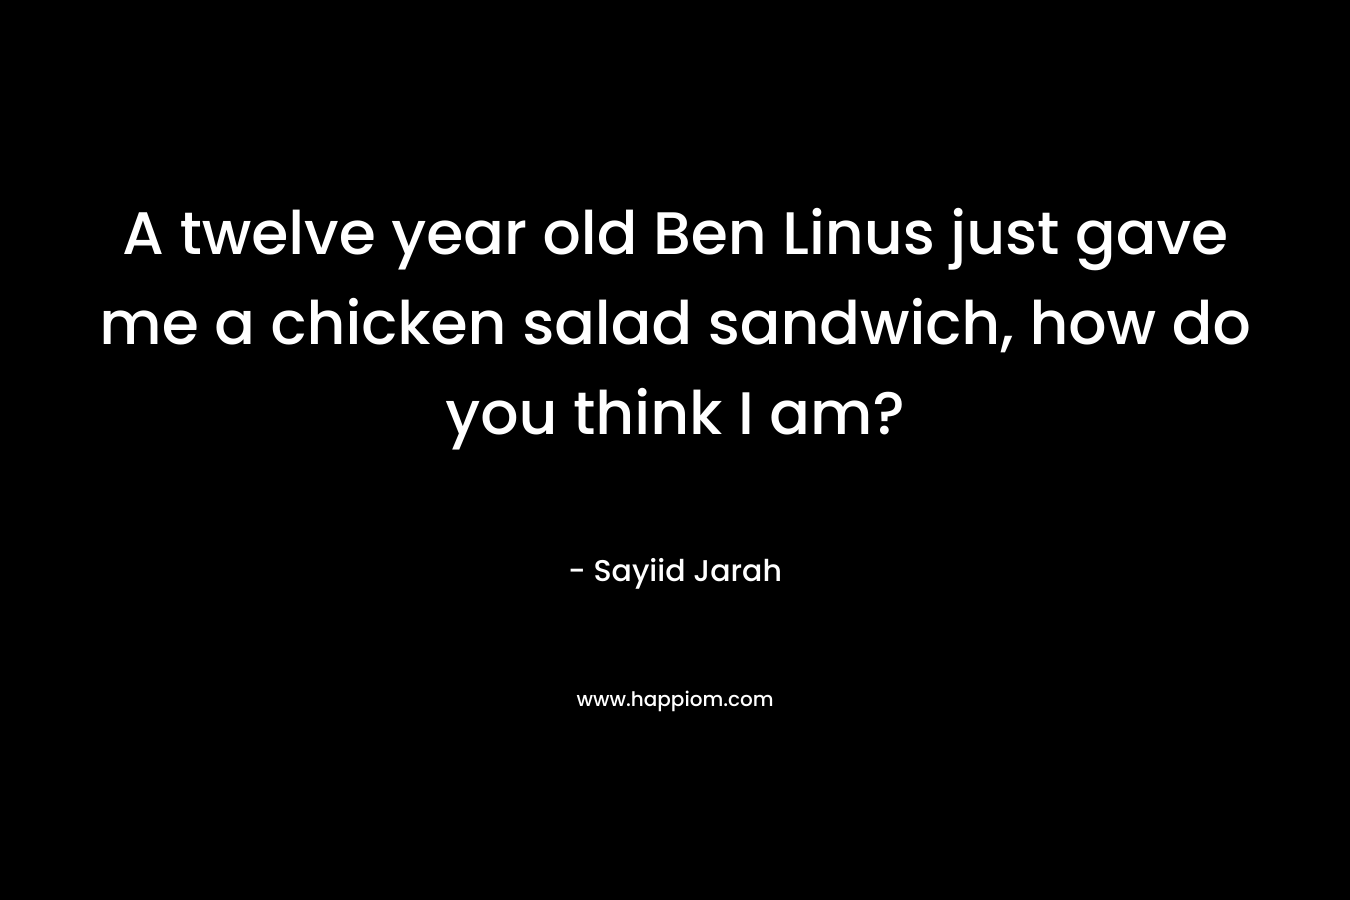 A twelve year old Ben Linus just gave me a chicken salad sandwich, how do you think I am?